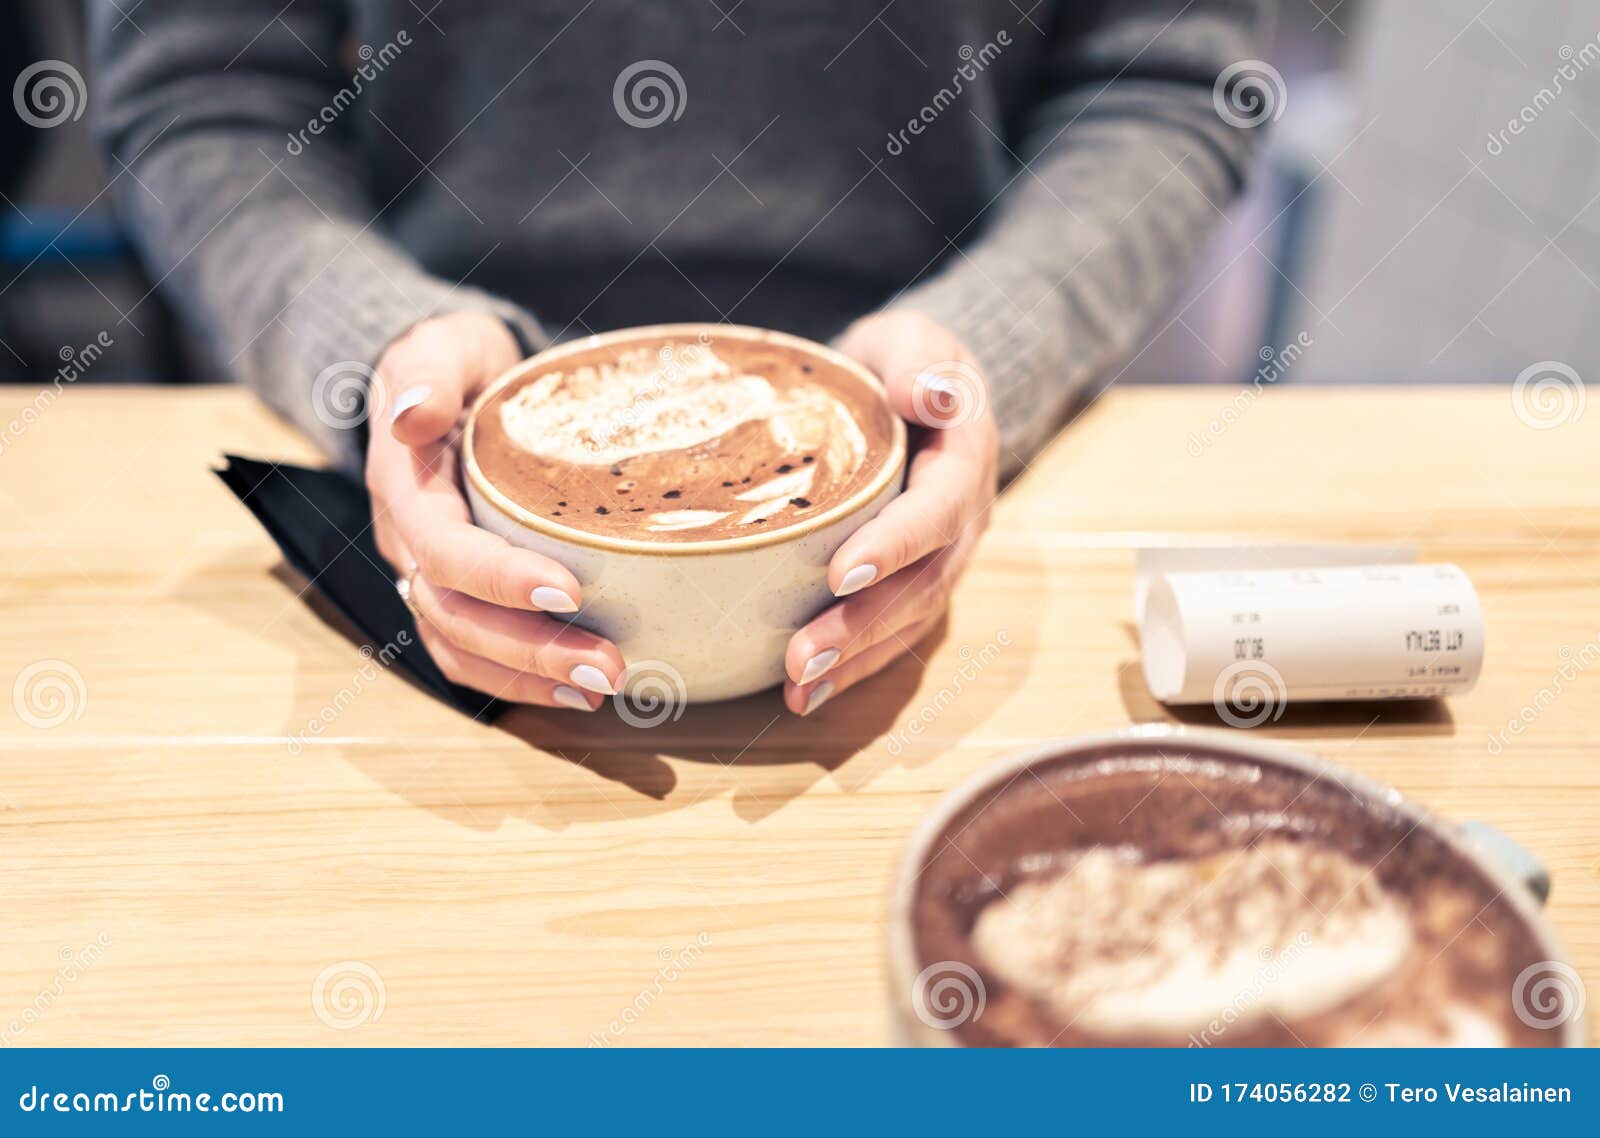 coffee cup between hands in cafe in winter. cappuccino, macchiato, latte or hot chocolate cocoa. two persons having a warm meeting